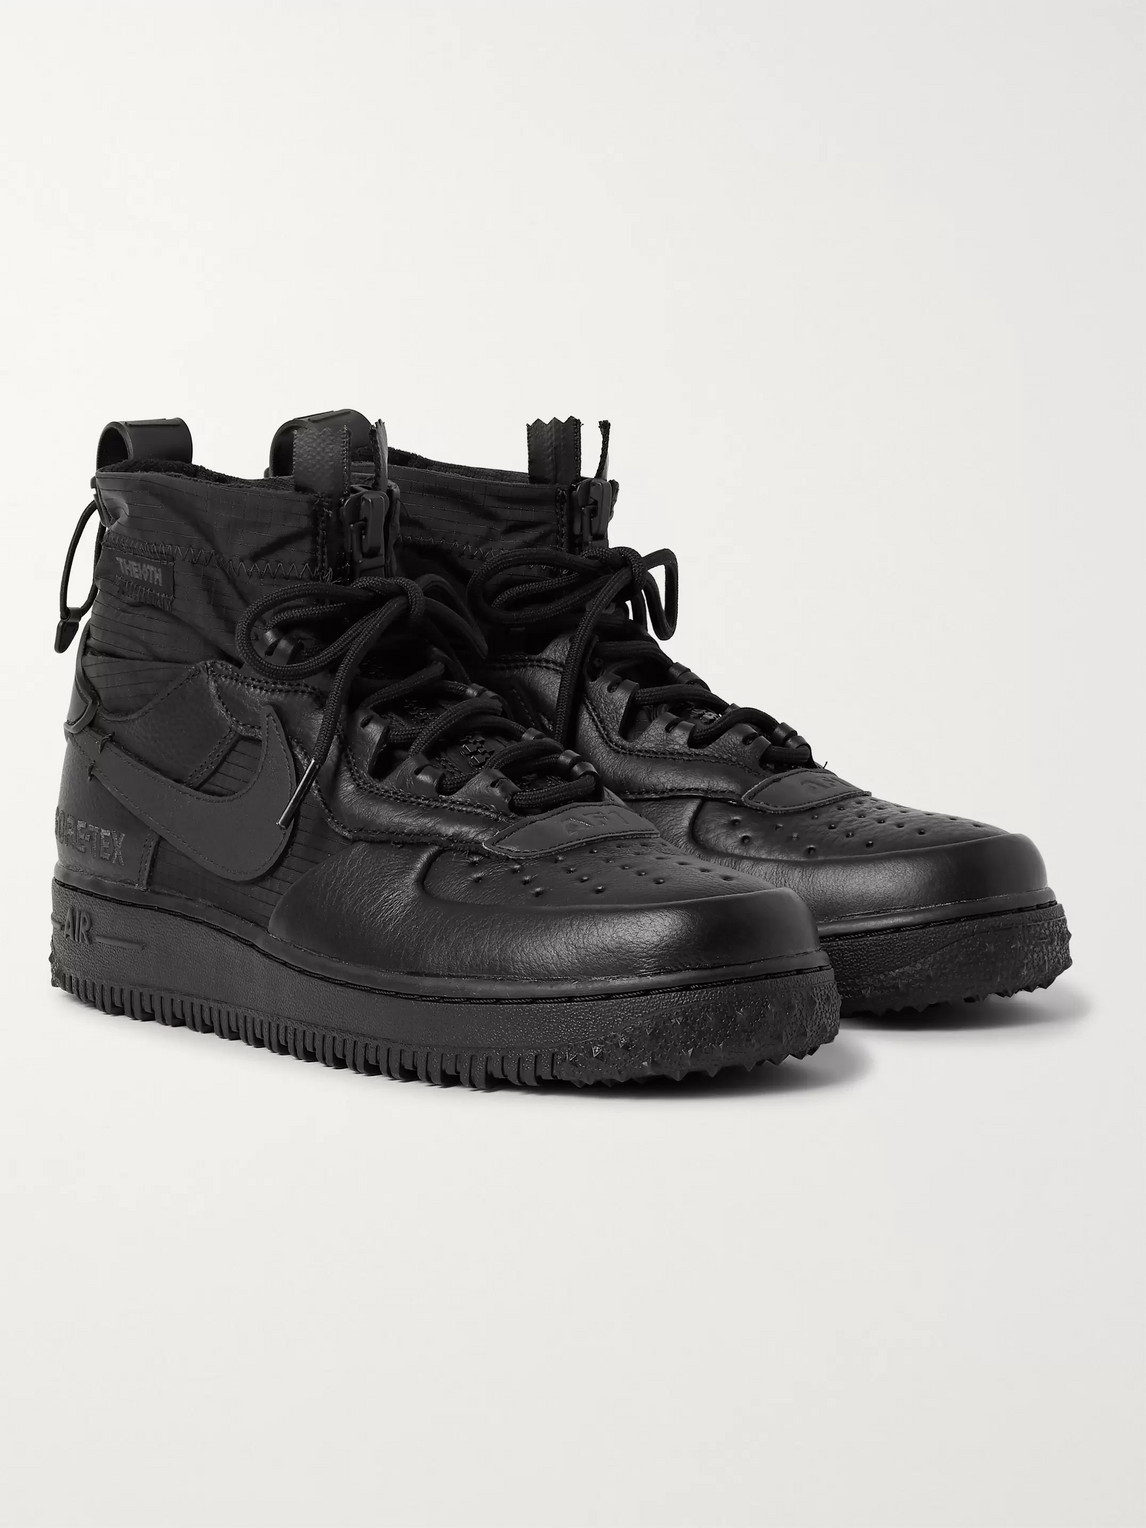 NIKE AIR FORCE 1 WINTER GORE-TEX AND LEATHER HIGH-TOP SNEAKERS